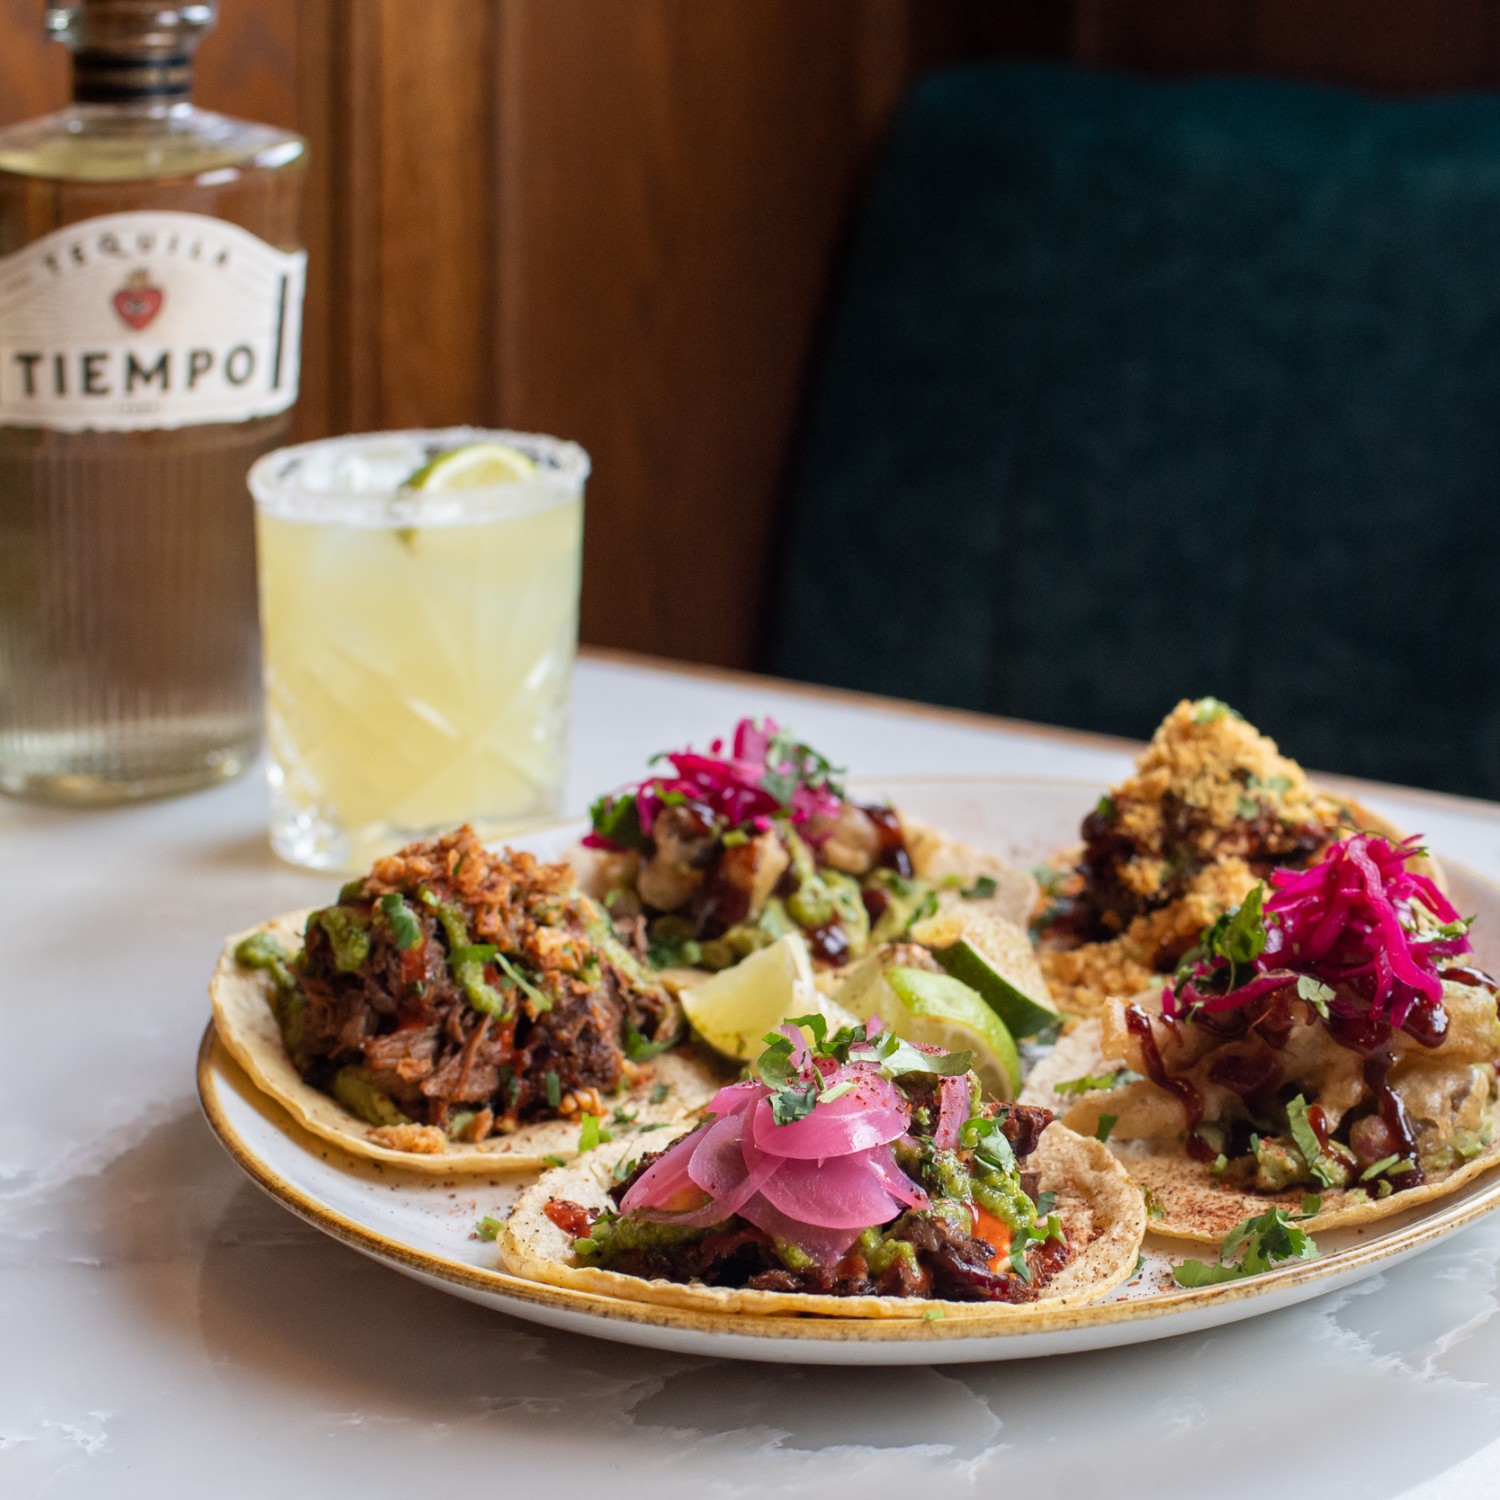 A night with TIEMPO TEQUILA 